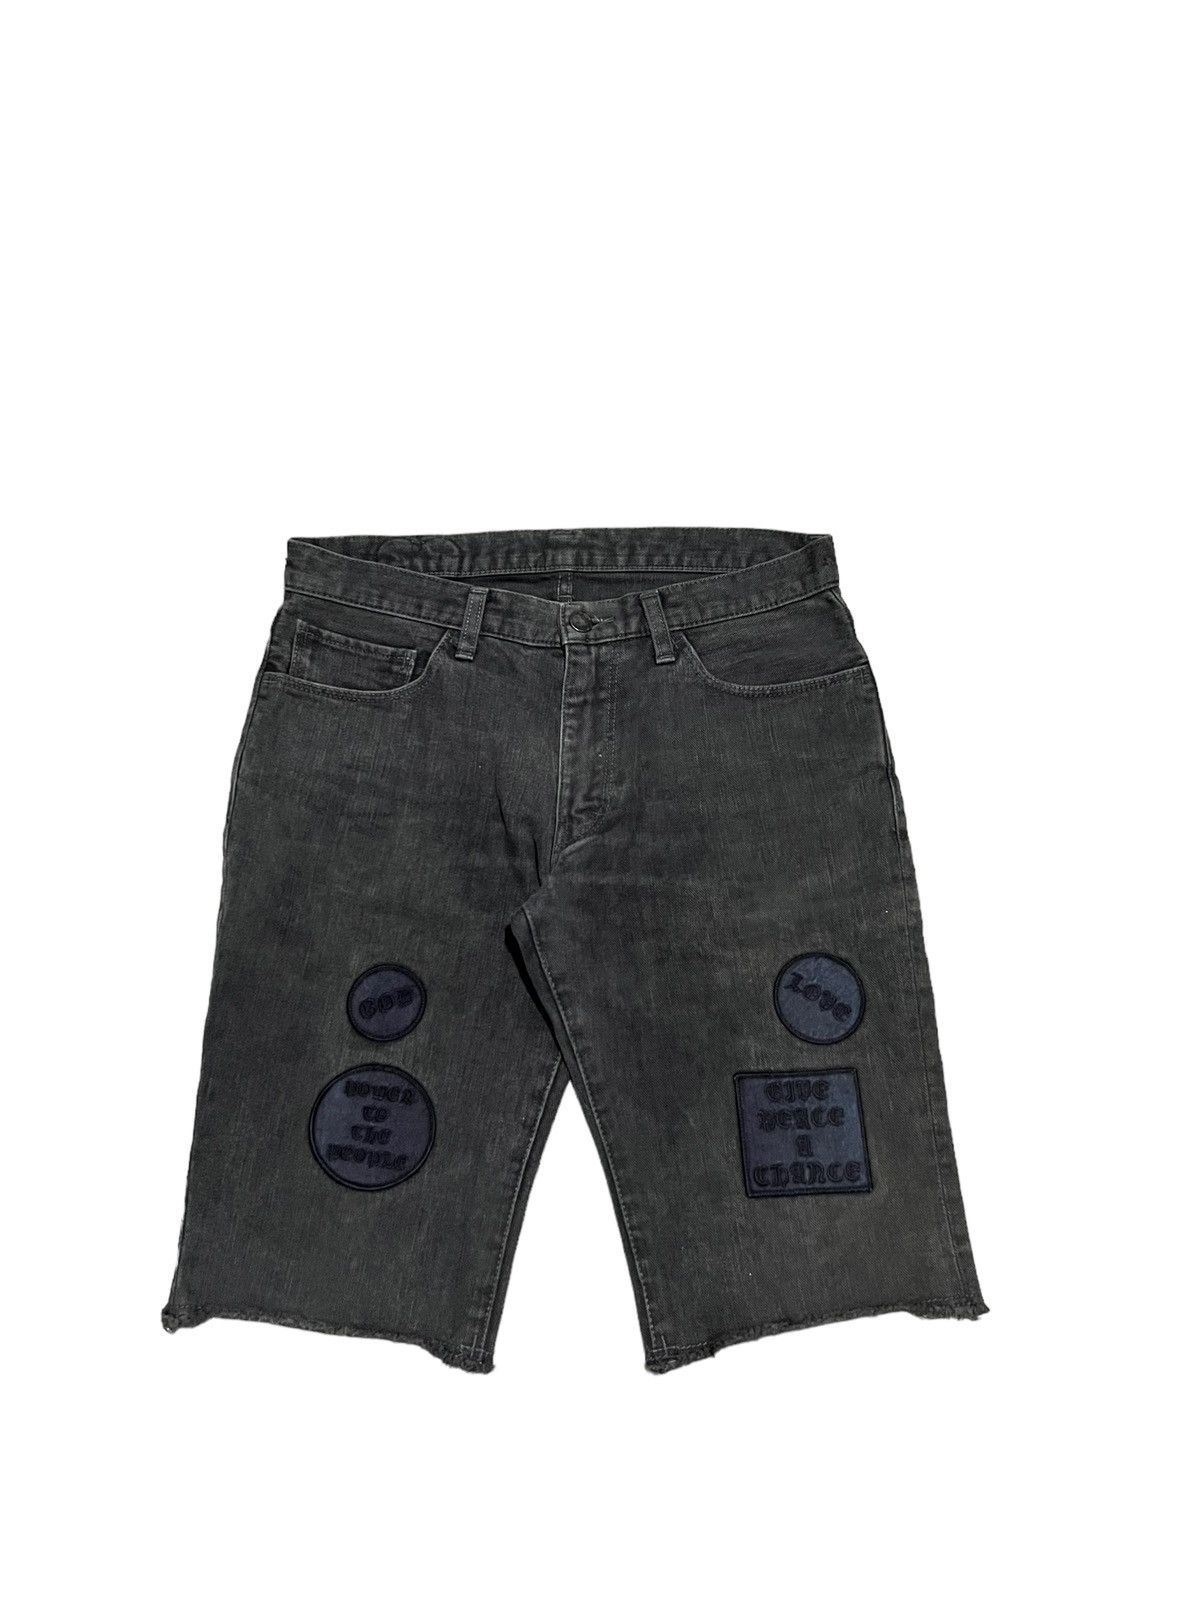 Number (N)ine Number Nine “Give Peace a Chance” denim | Grailed